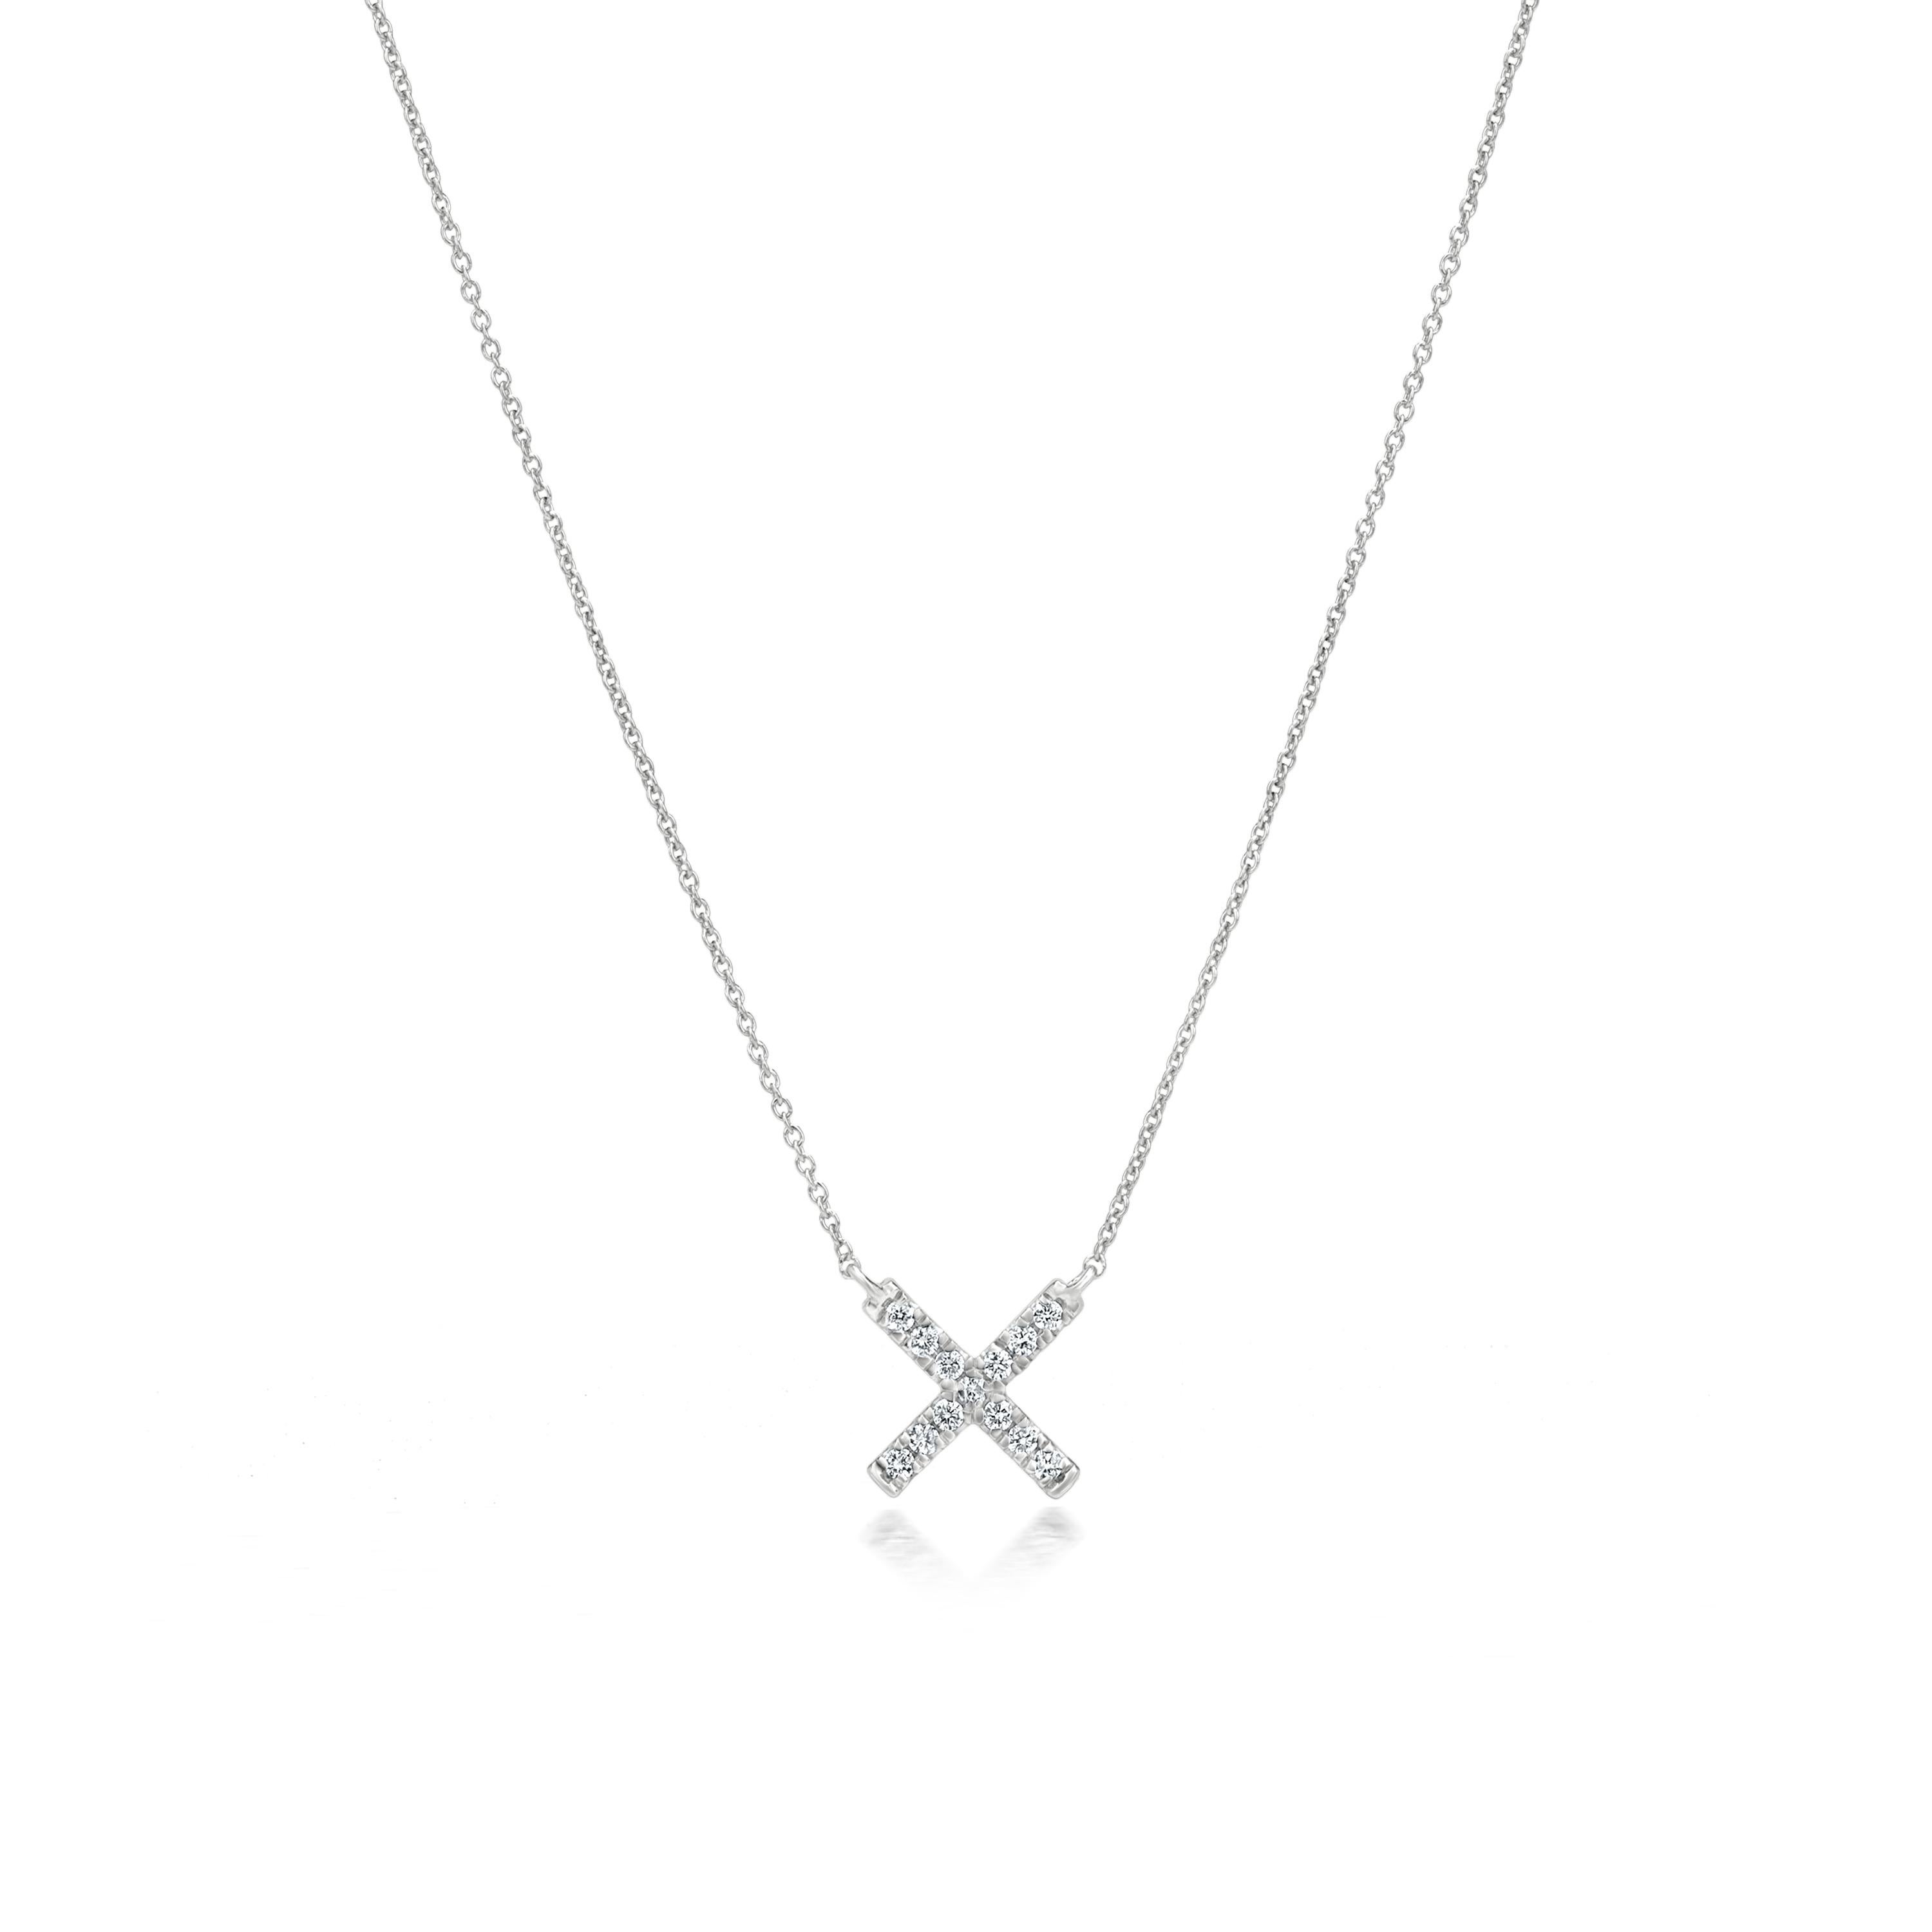 Subtle yet pretty this Luxle X pendant necklace is the new fashion statement.  This necklace is featured with 13 round cut diamonds, totaling 0.12Cts, pave set adorned in an adorable motif of X. The pendant is suspended gracefully from an elegant